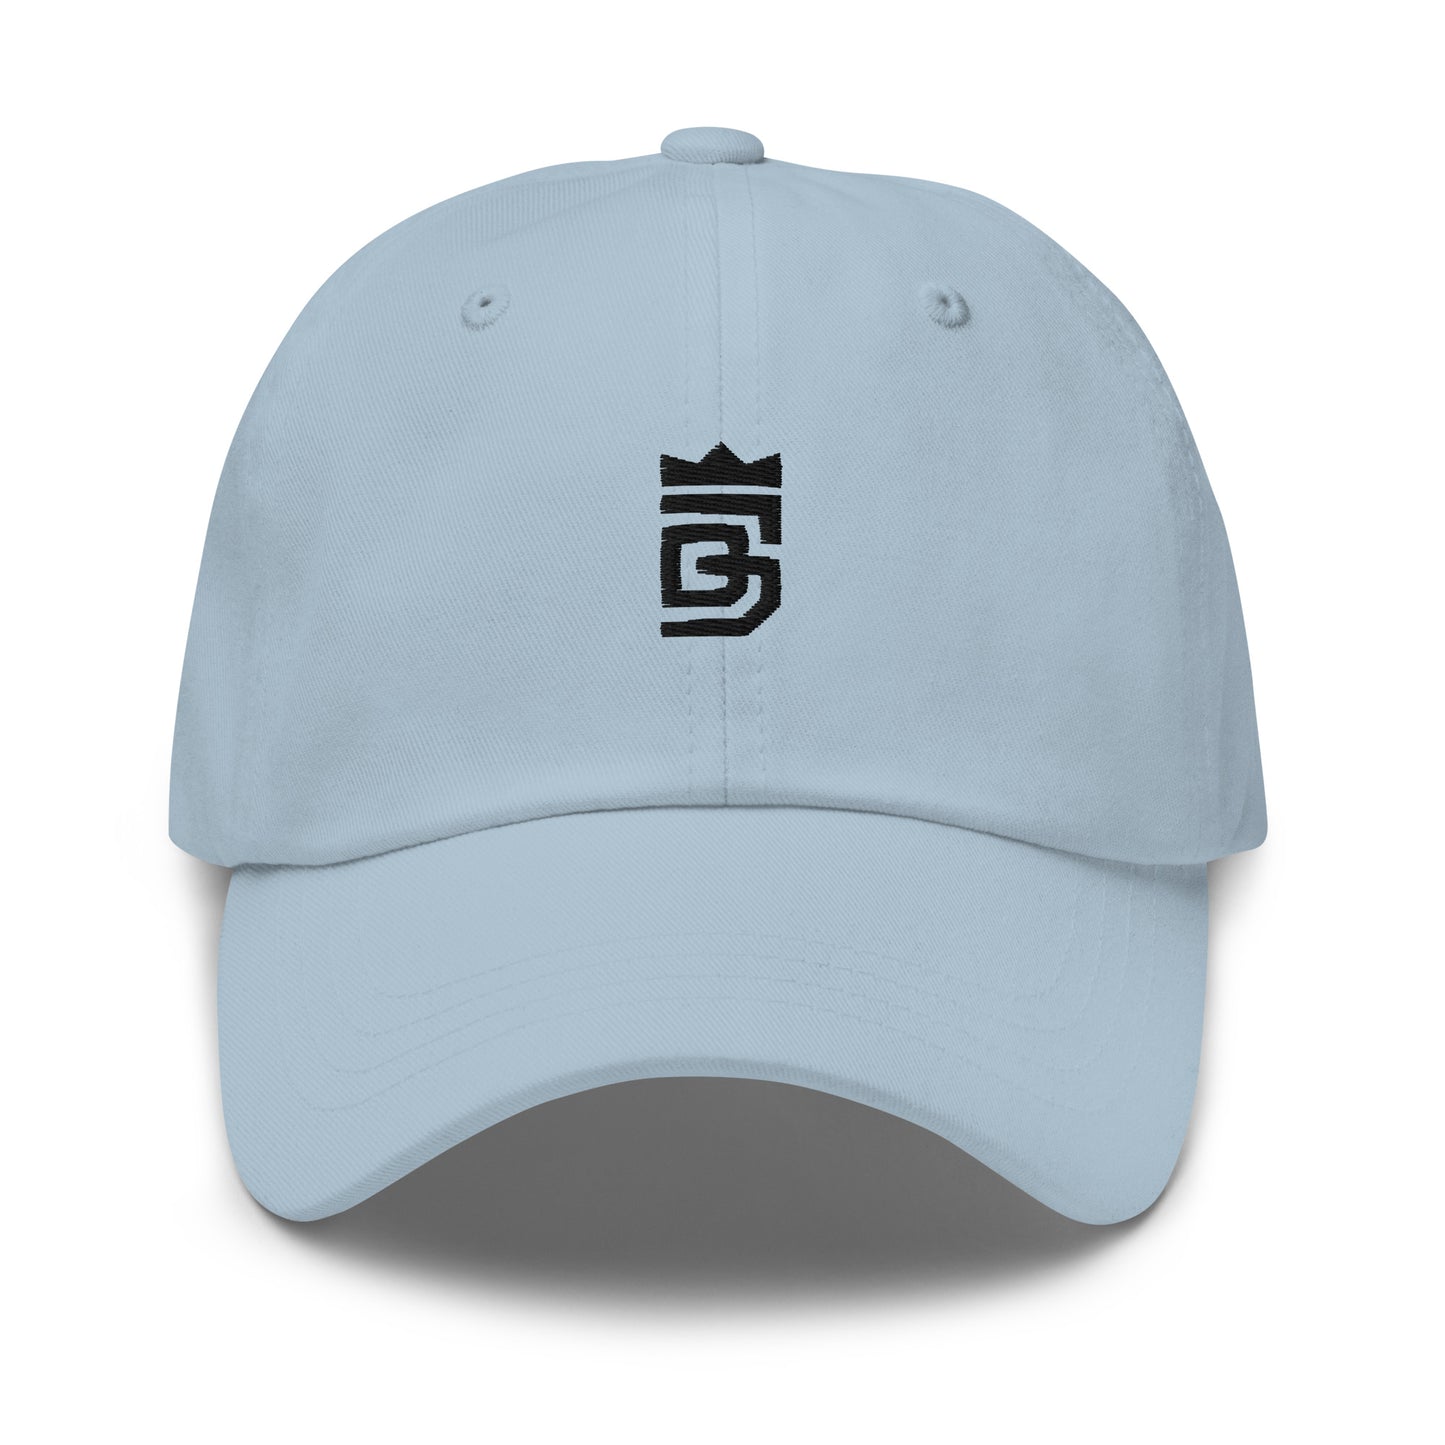 DG - Curved Hat